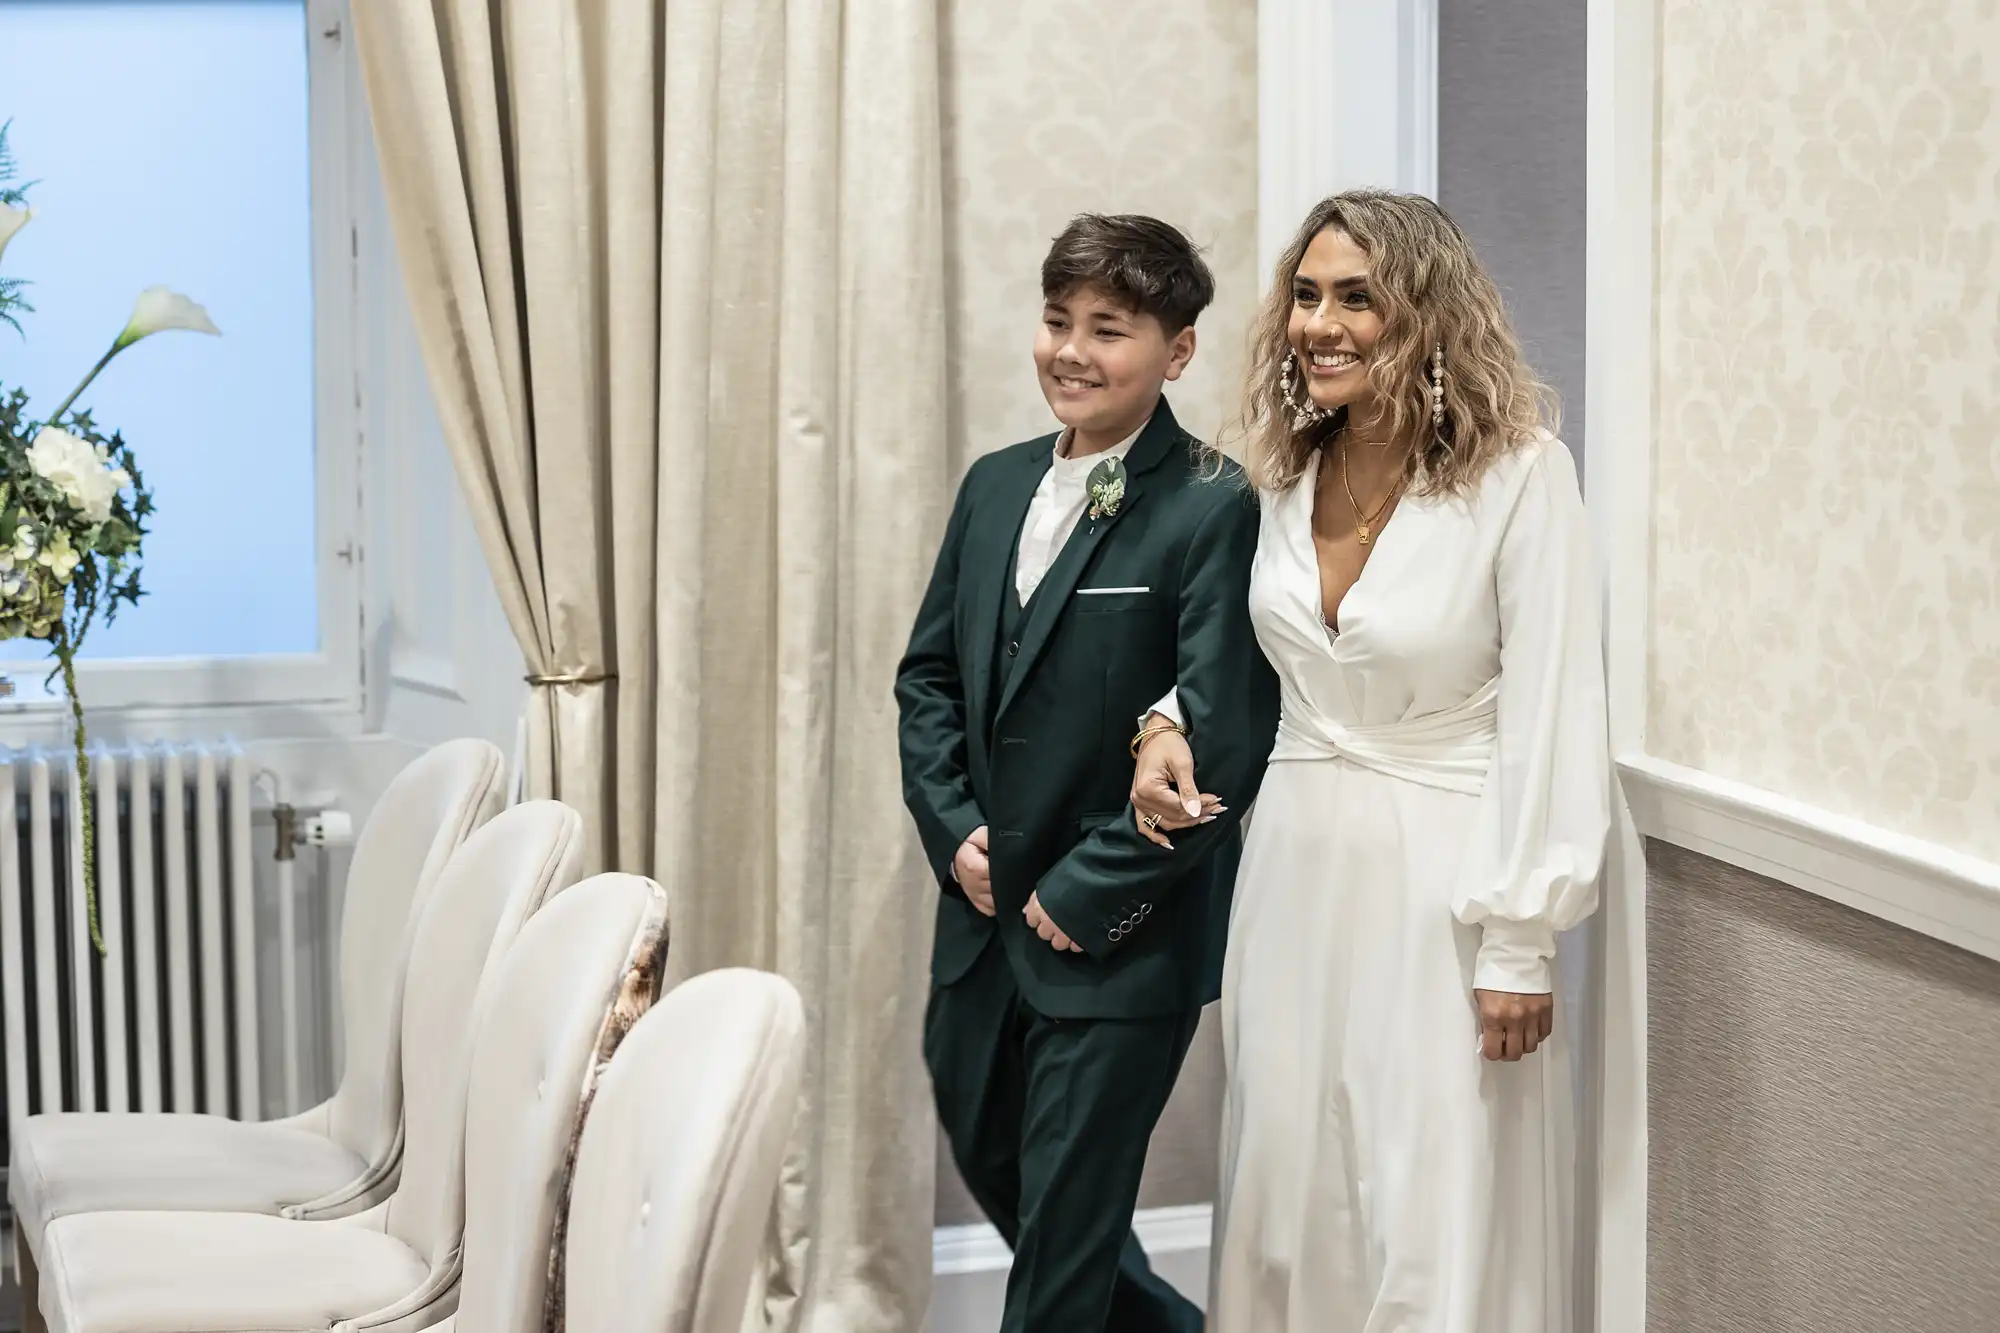 A woman in a white dress and a young person in a dark green suit walk arm in arm through a room with white chairs and beige curtains.